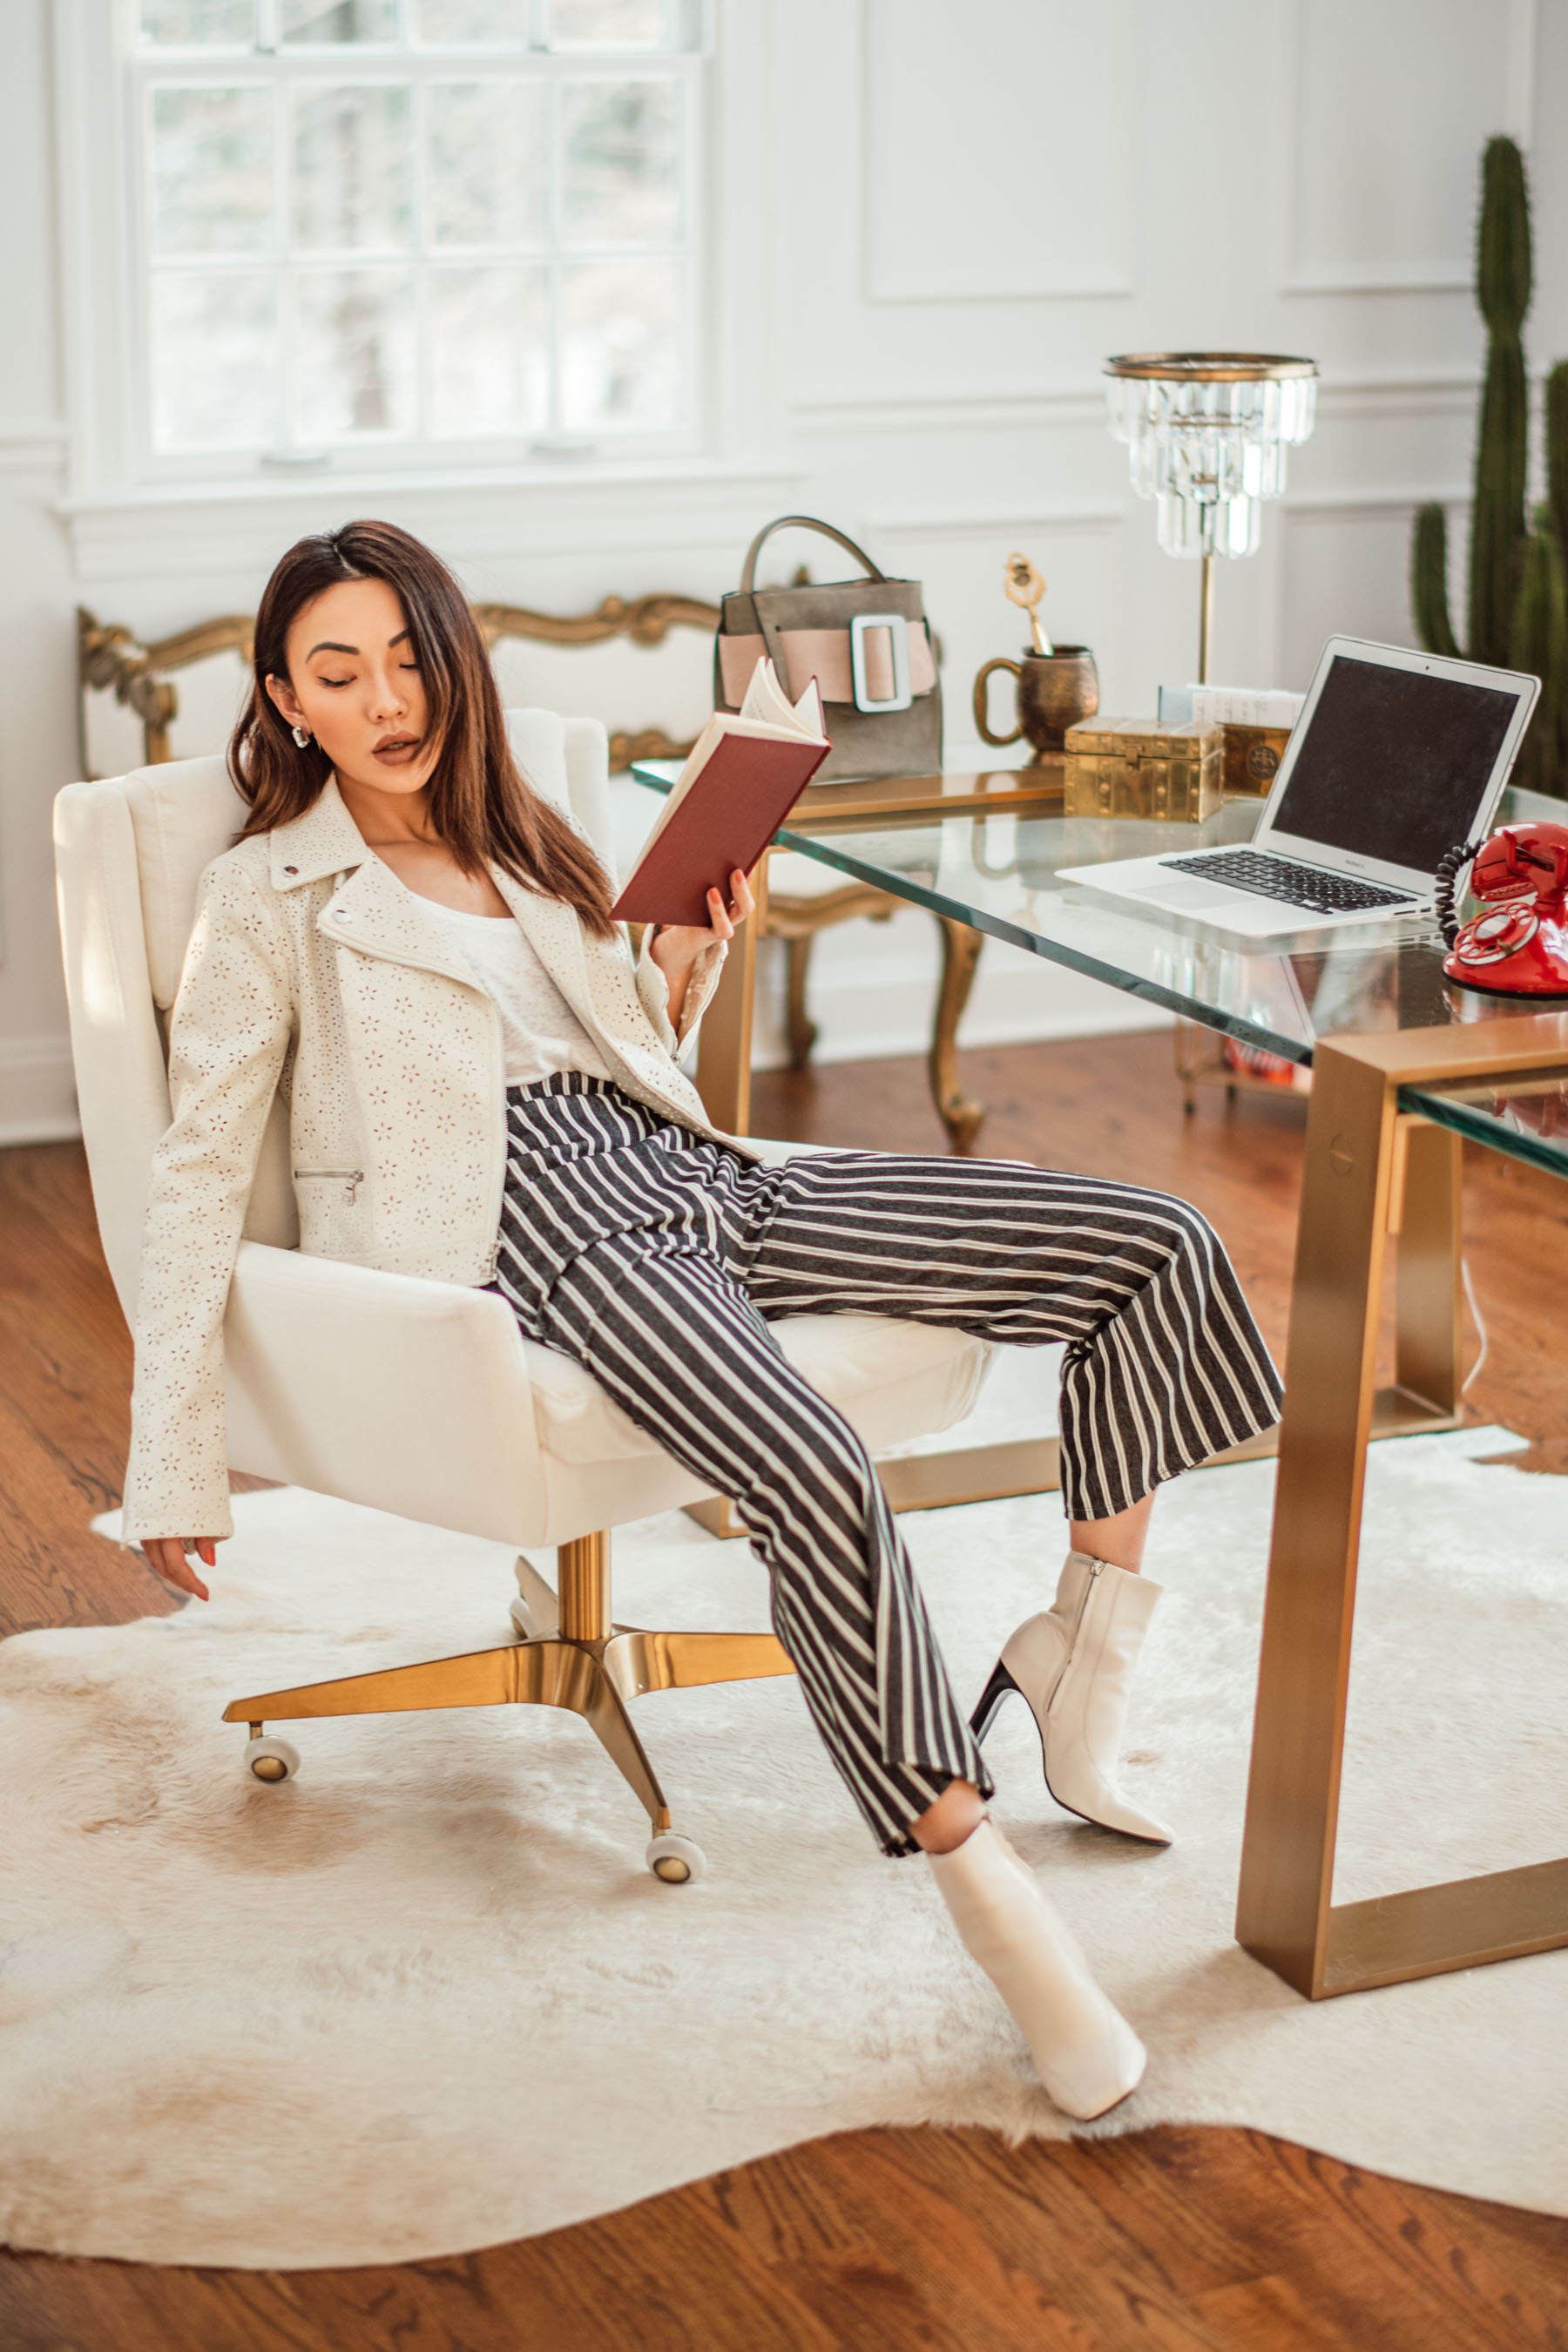 Work Wear Trends for an Ultra Chic Look - Express leather jacket, Express striped trousers, white ankle boots, professional spring outfit, professional office look // Notjessfashion.com